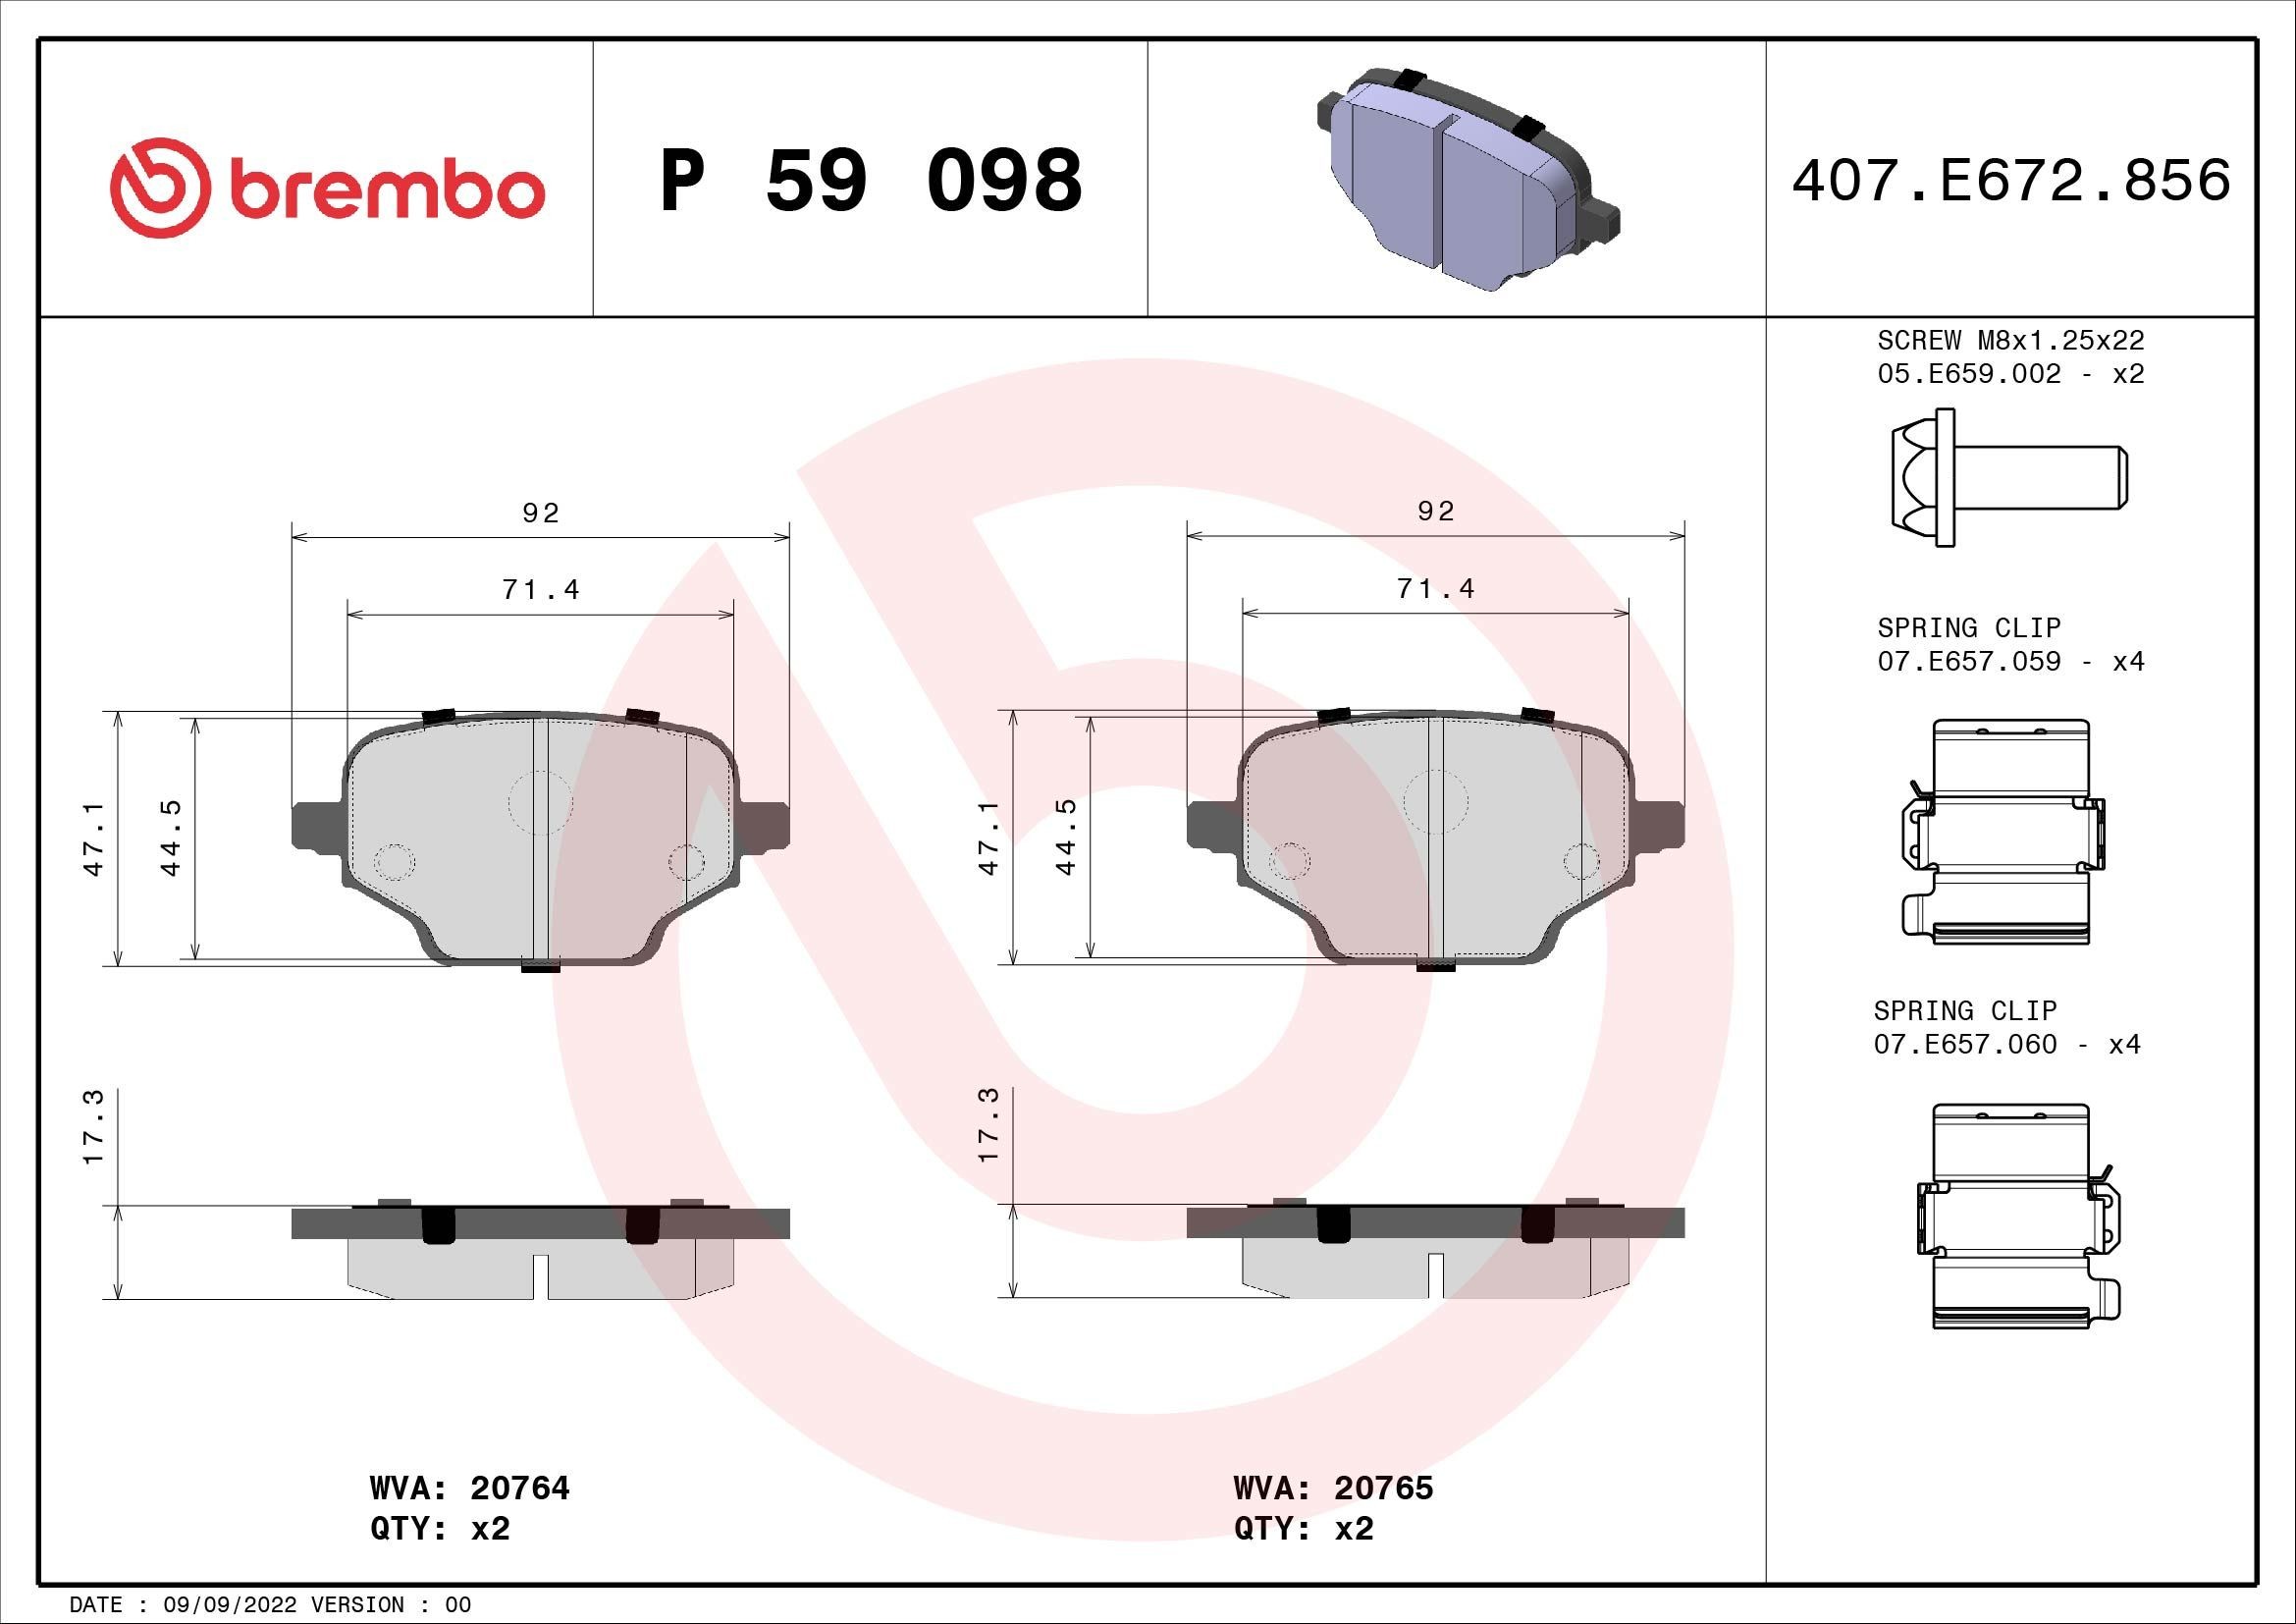 BREMBO P 59 098 Brake pad set excl. wear warning contact, with brake caliper screws, with accessories